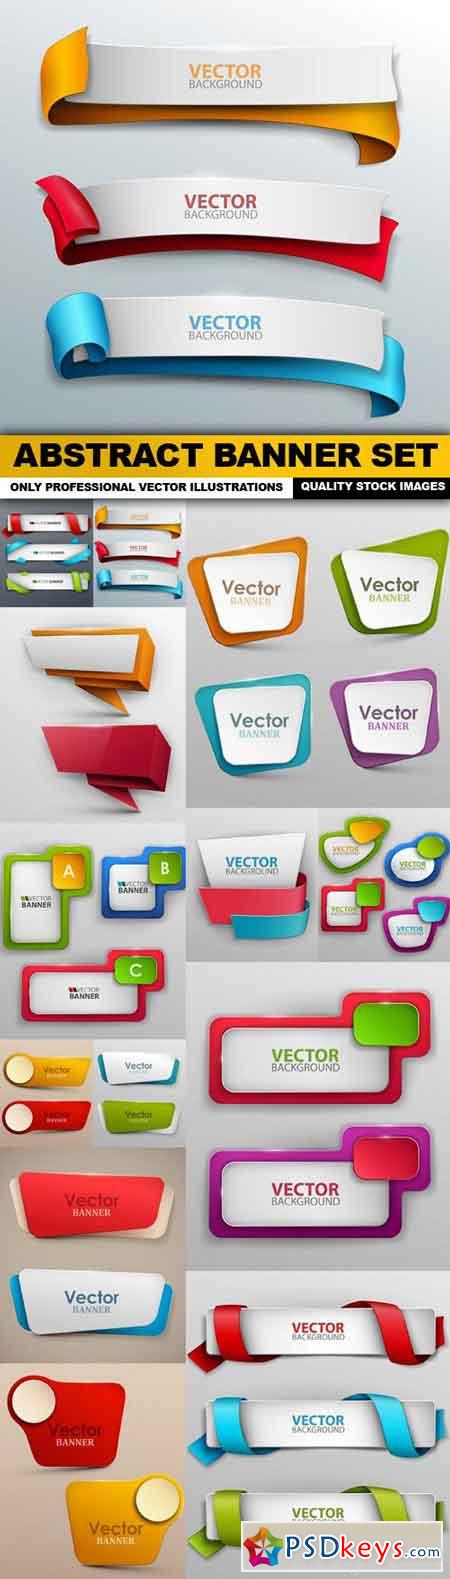 Abstract Banner Set - 13 Vector